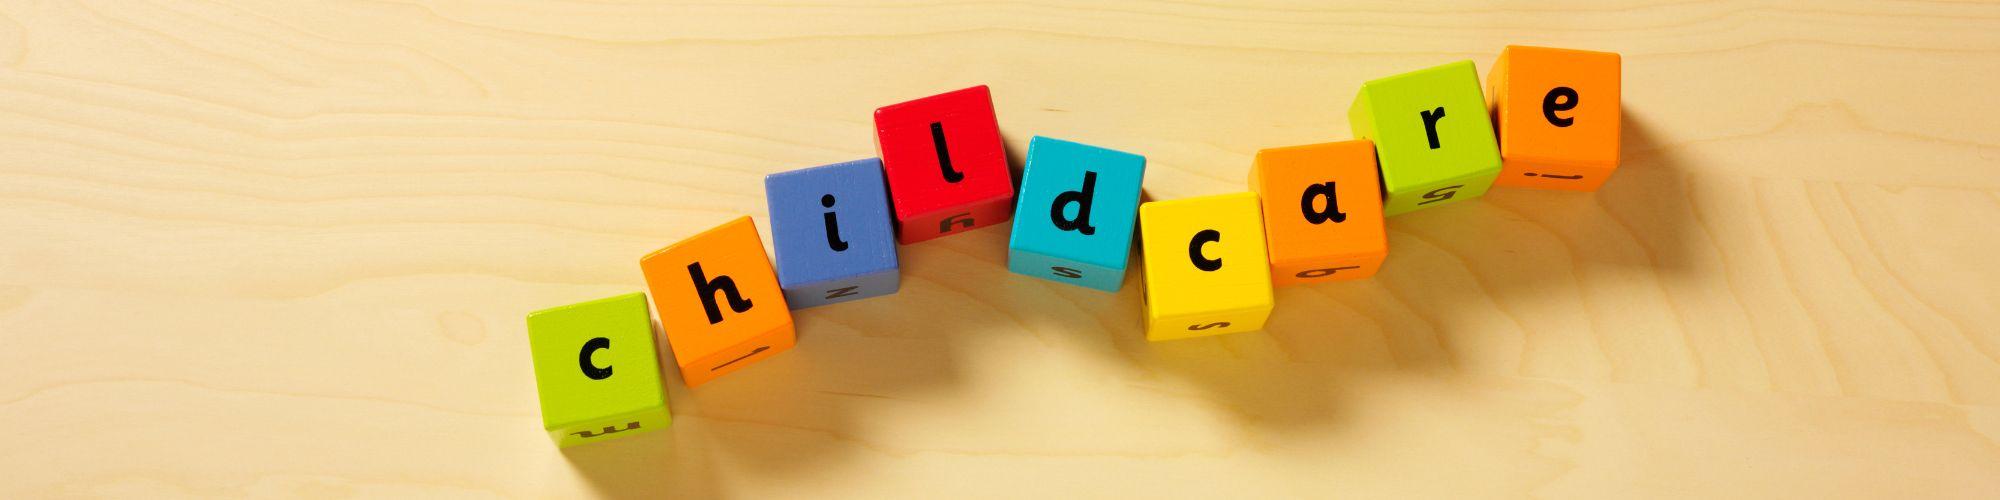 Building blocks with letters spelling the word "childcare"